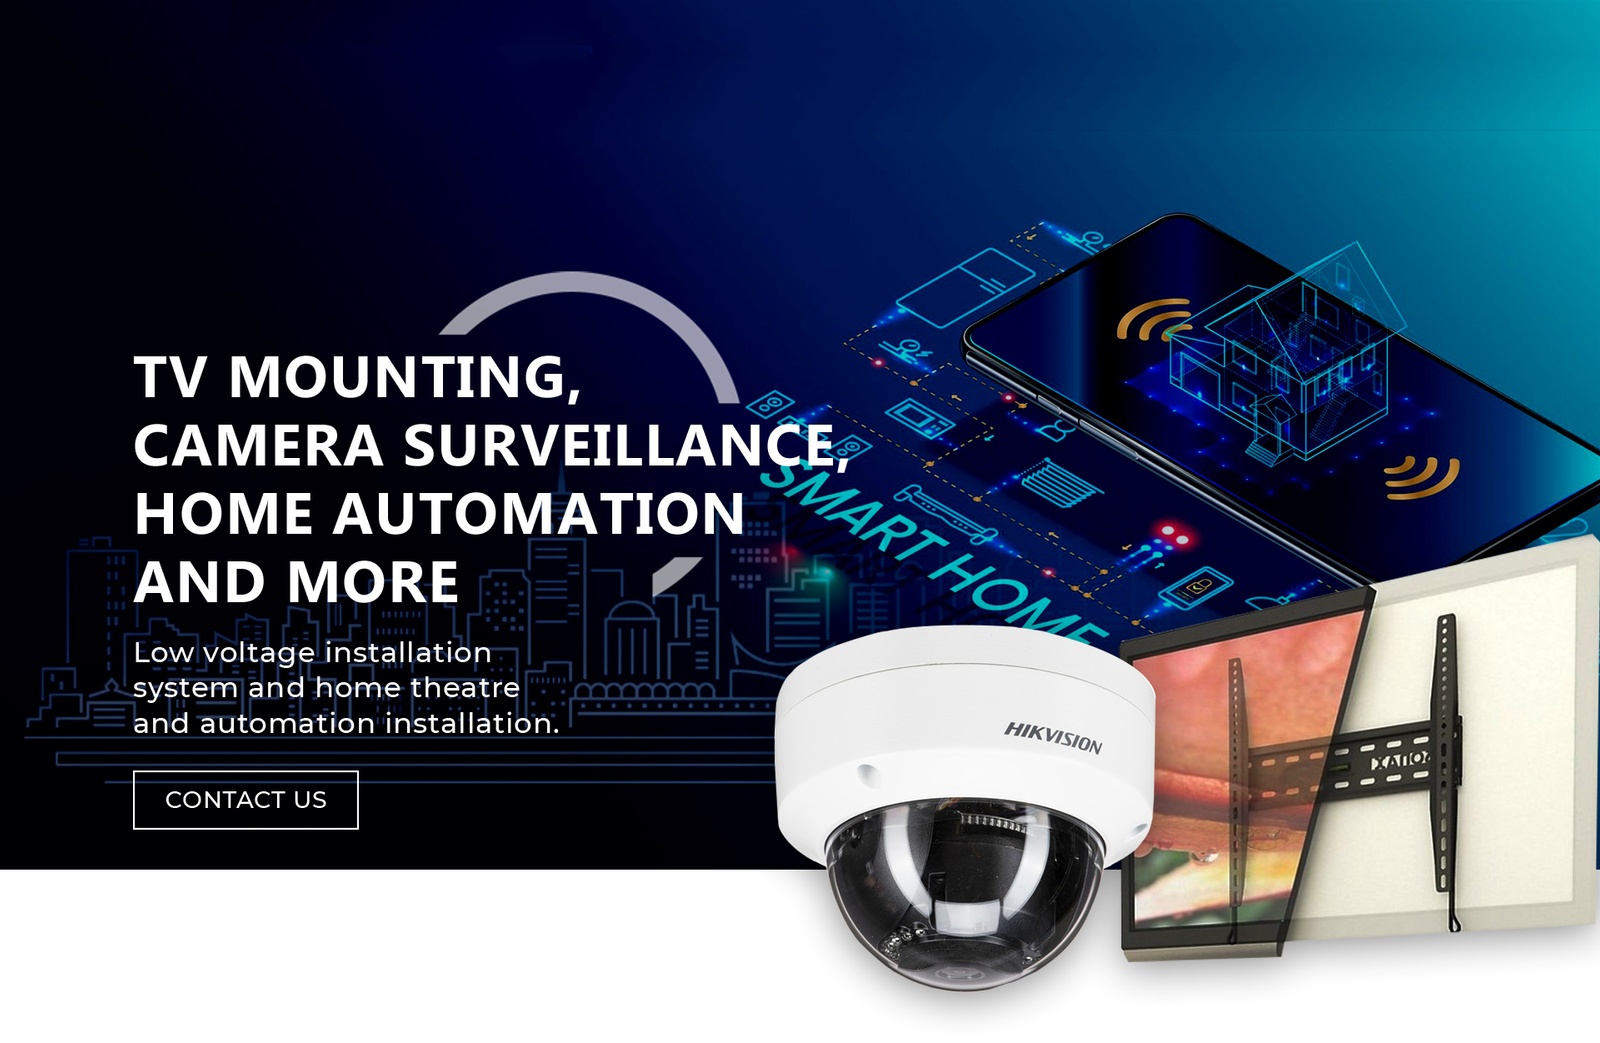 TV mounting, camera surveillance, home automation and more